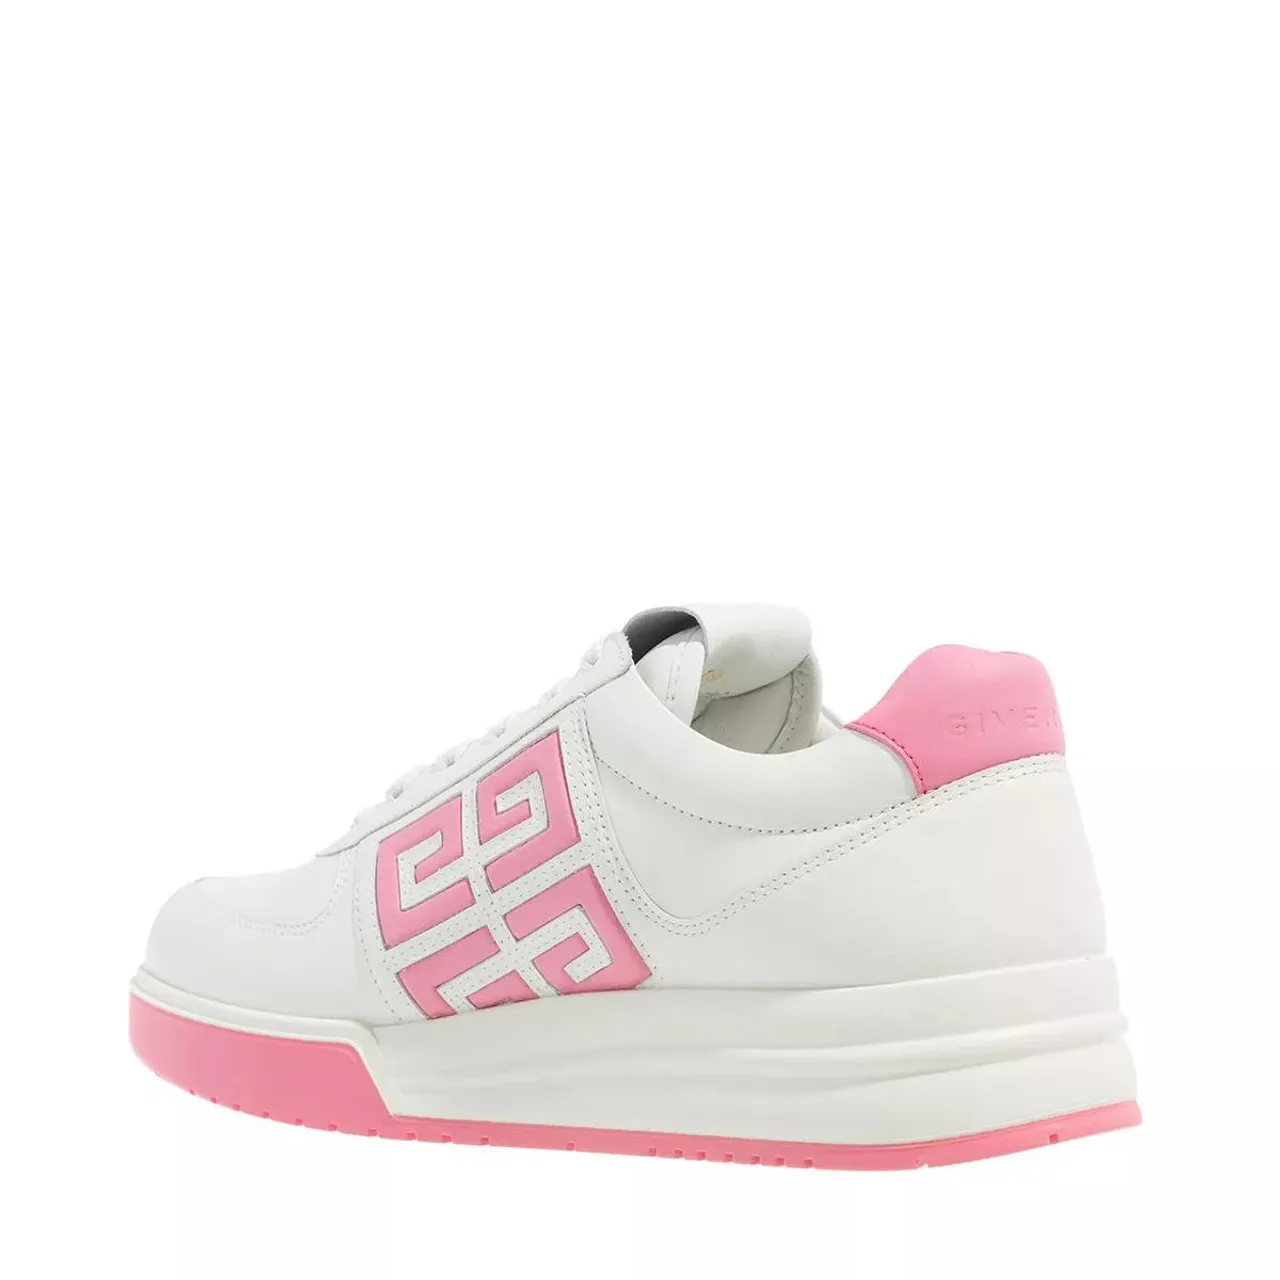 Givenchy Sneakers - G4 Low top Sneaker - pink - Sneakers for ladies